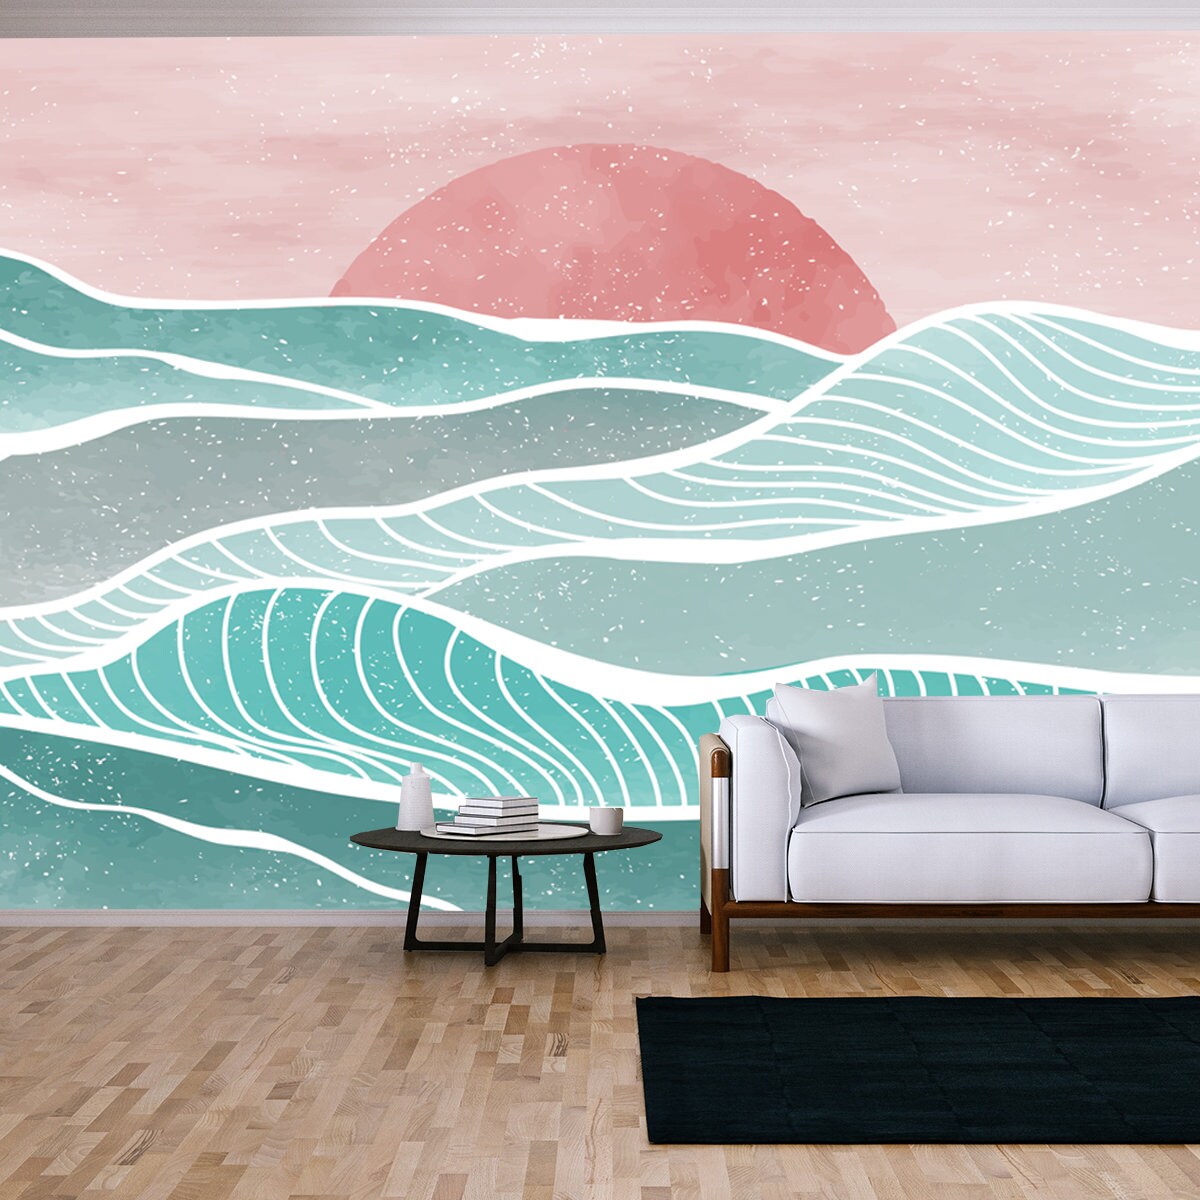 Creative Minimalist Modern Paint and Line Art. Abstract Ocean Wave and Mountain Contemporary Aesthetic Backgrounds Landscapes Mural